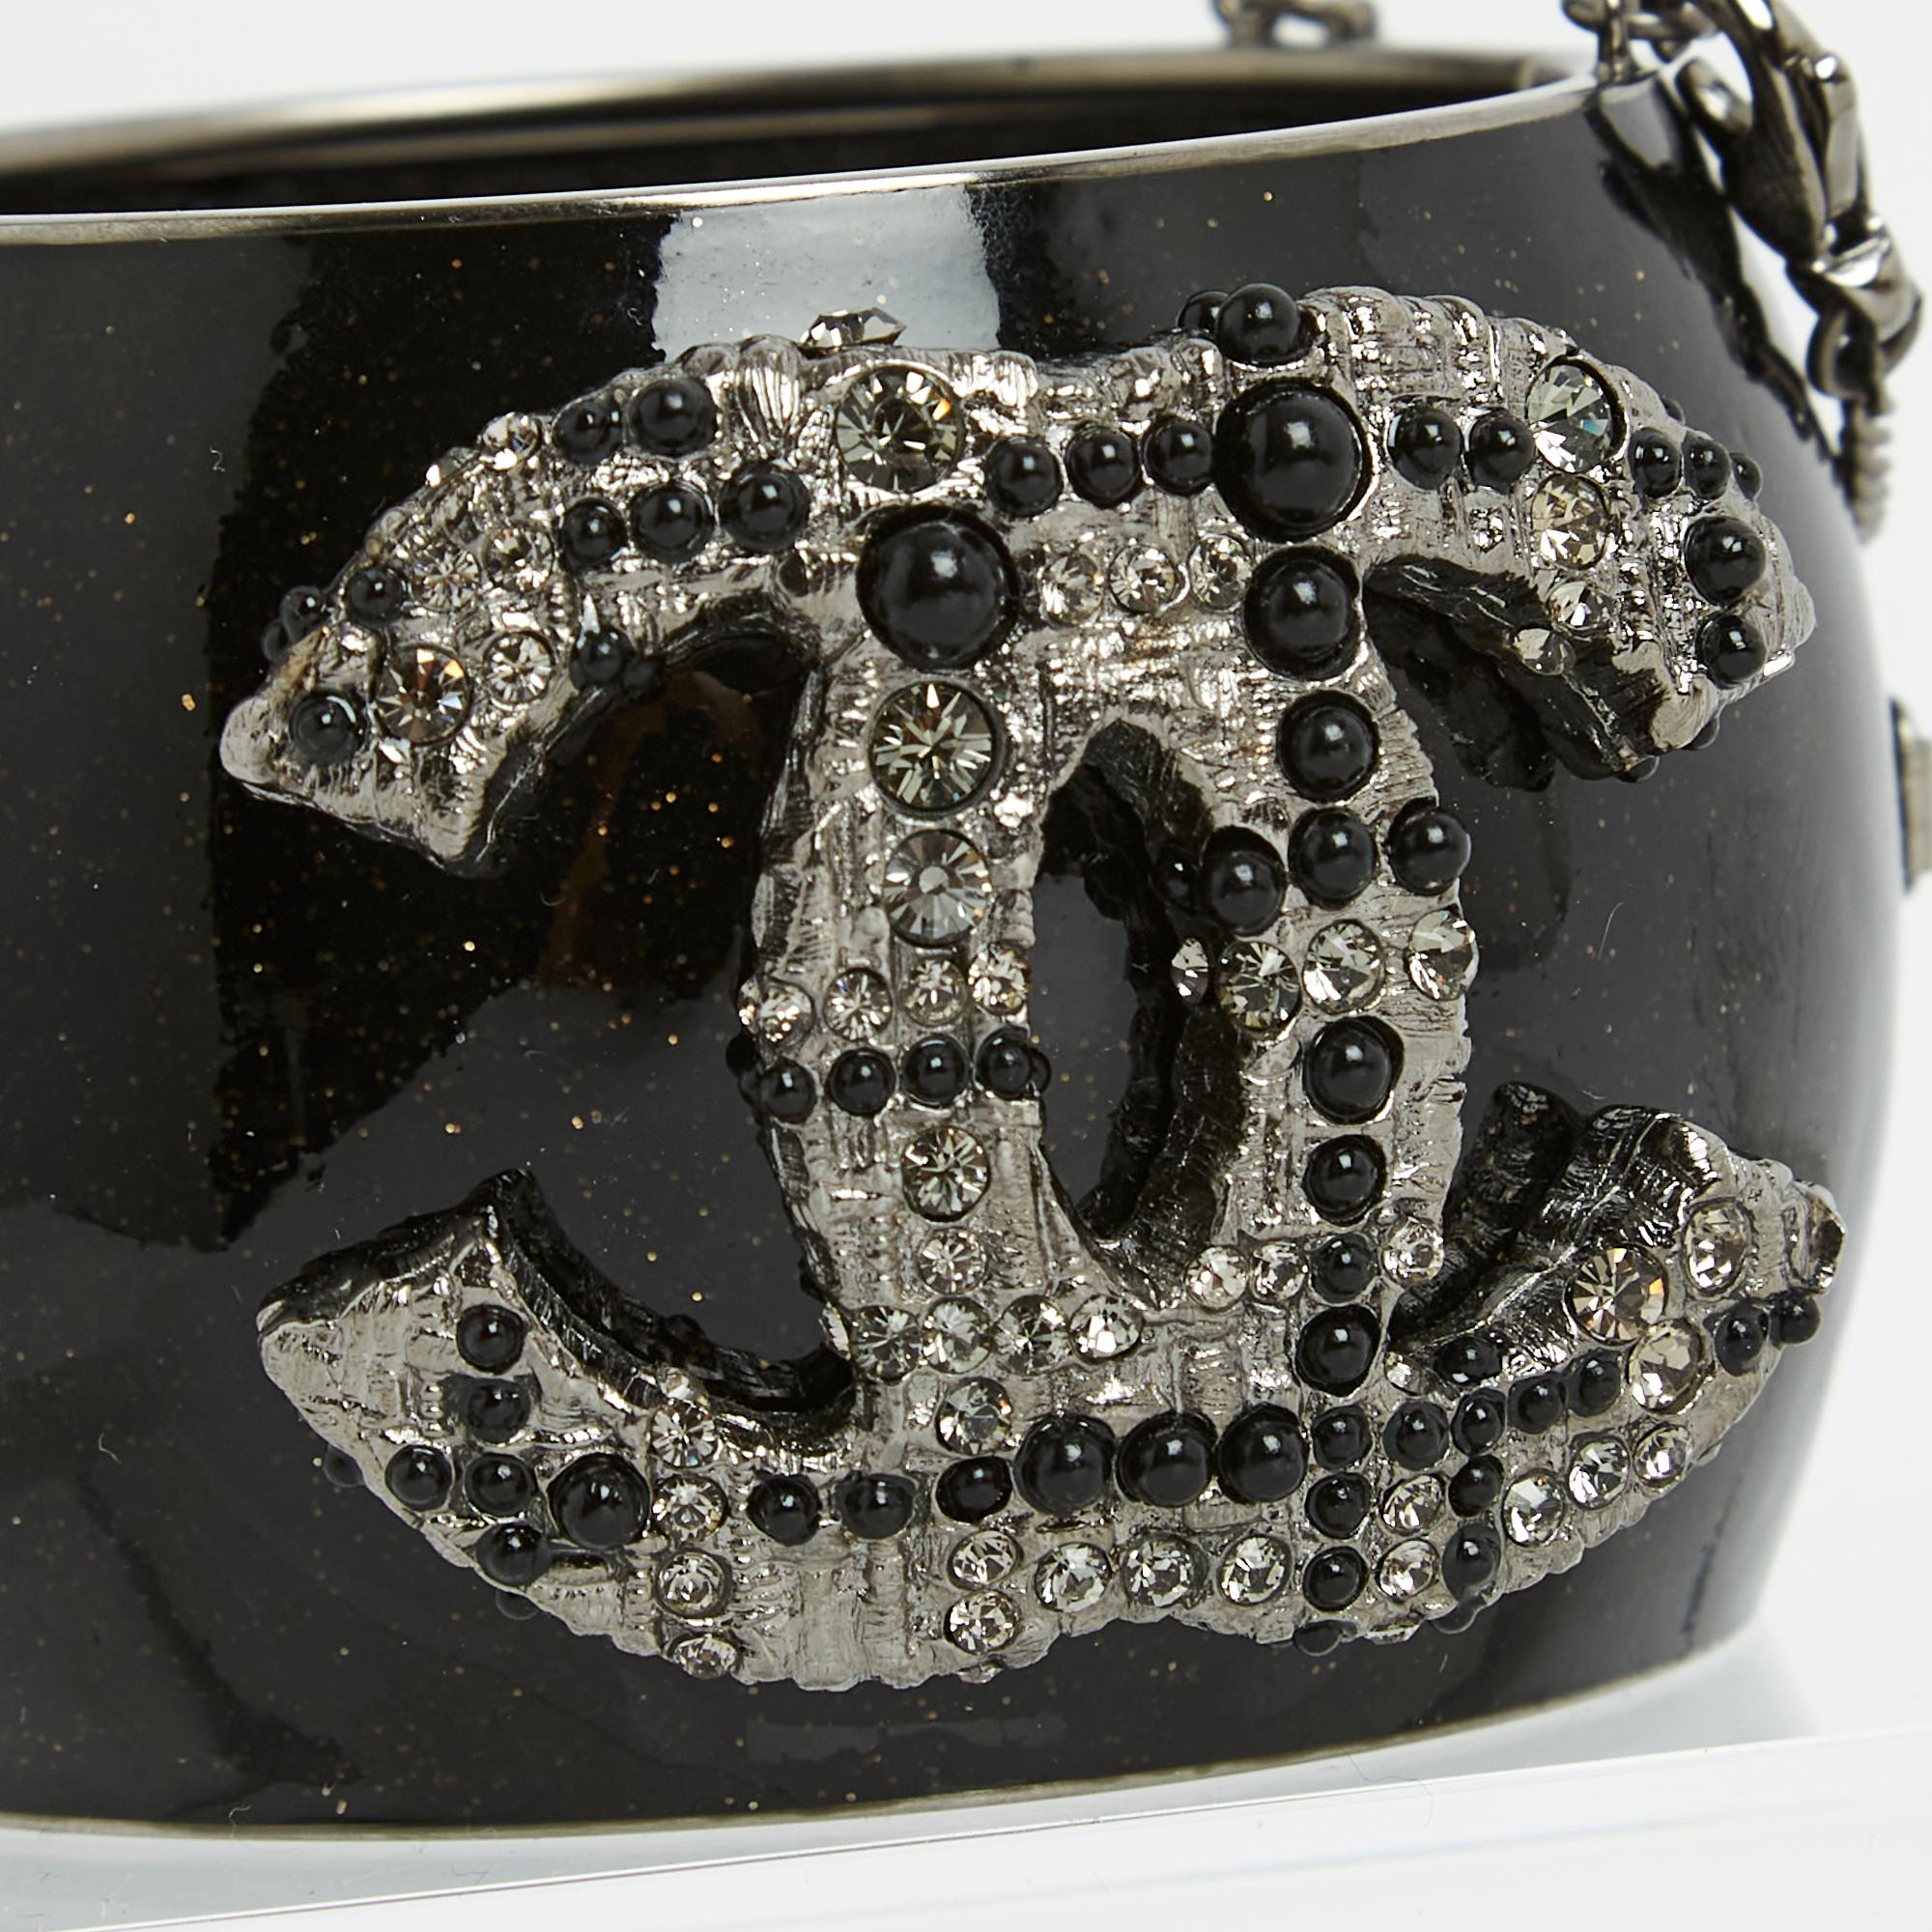 Chanel cuff bracelet in aged silver metal covered with sparkling black enamel with brown reflections topped with a large CC logo in tweed-style metal dotted with rhinestones and cabochons of different sizes and colors, interior lined with quilted